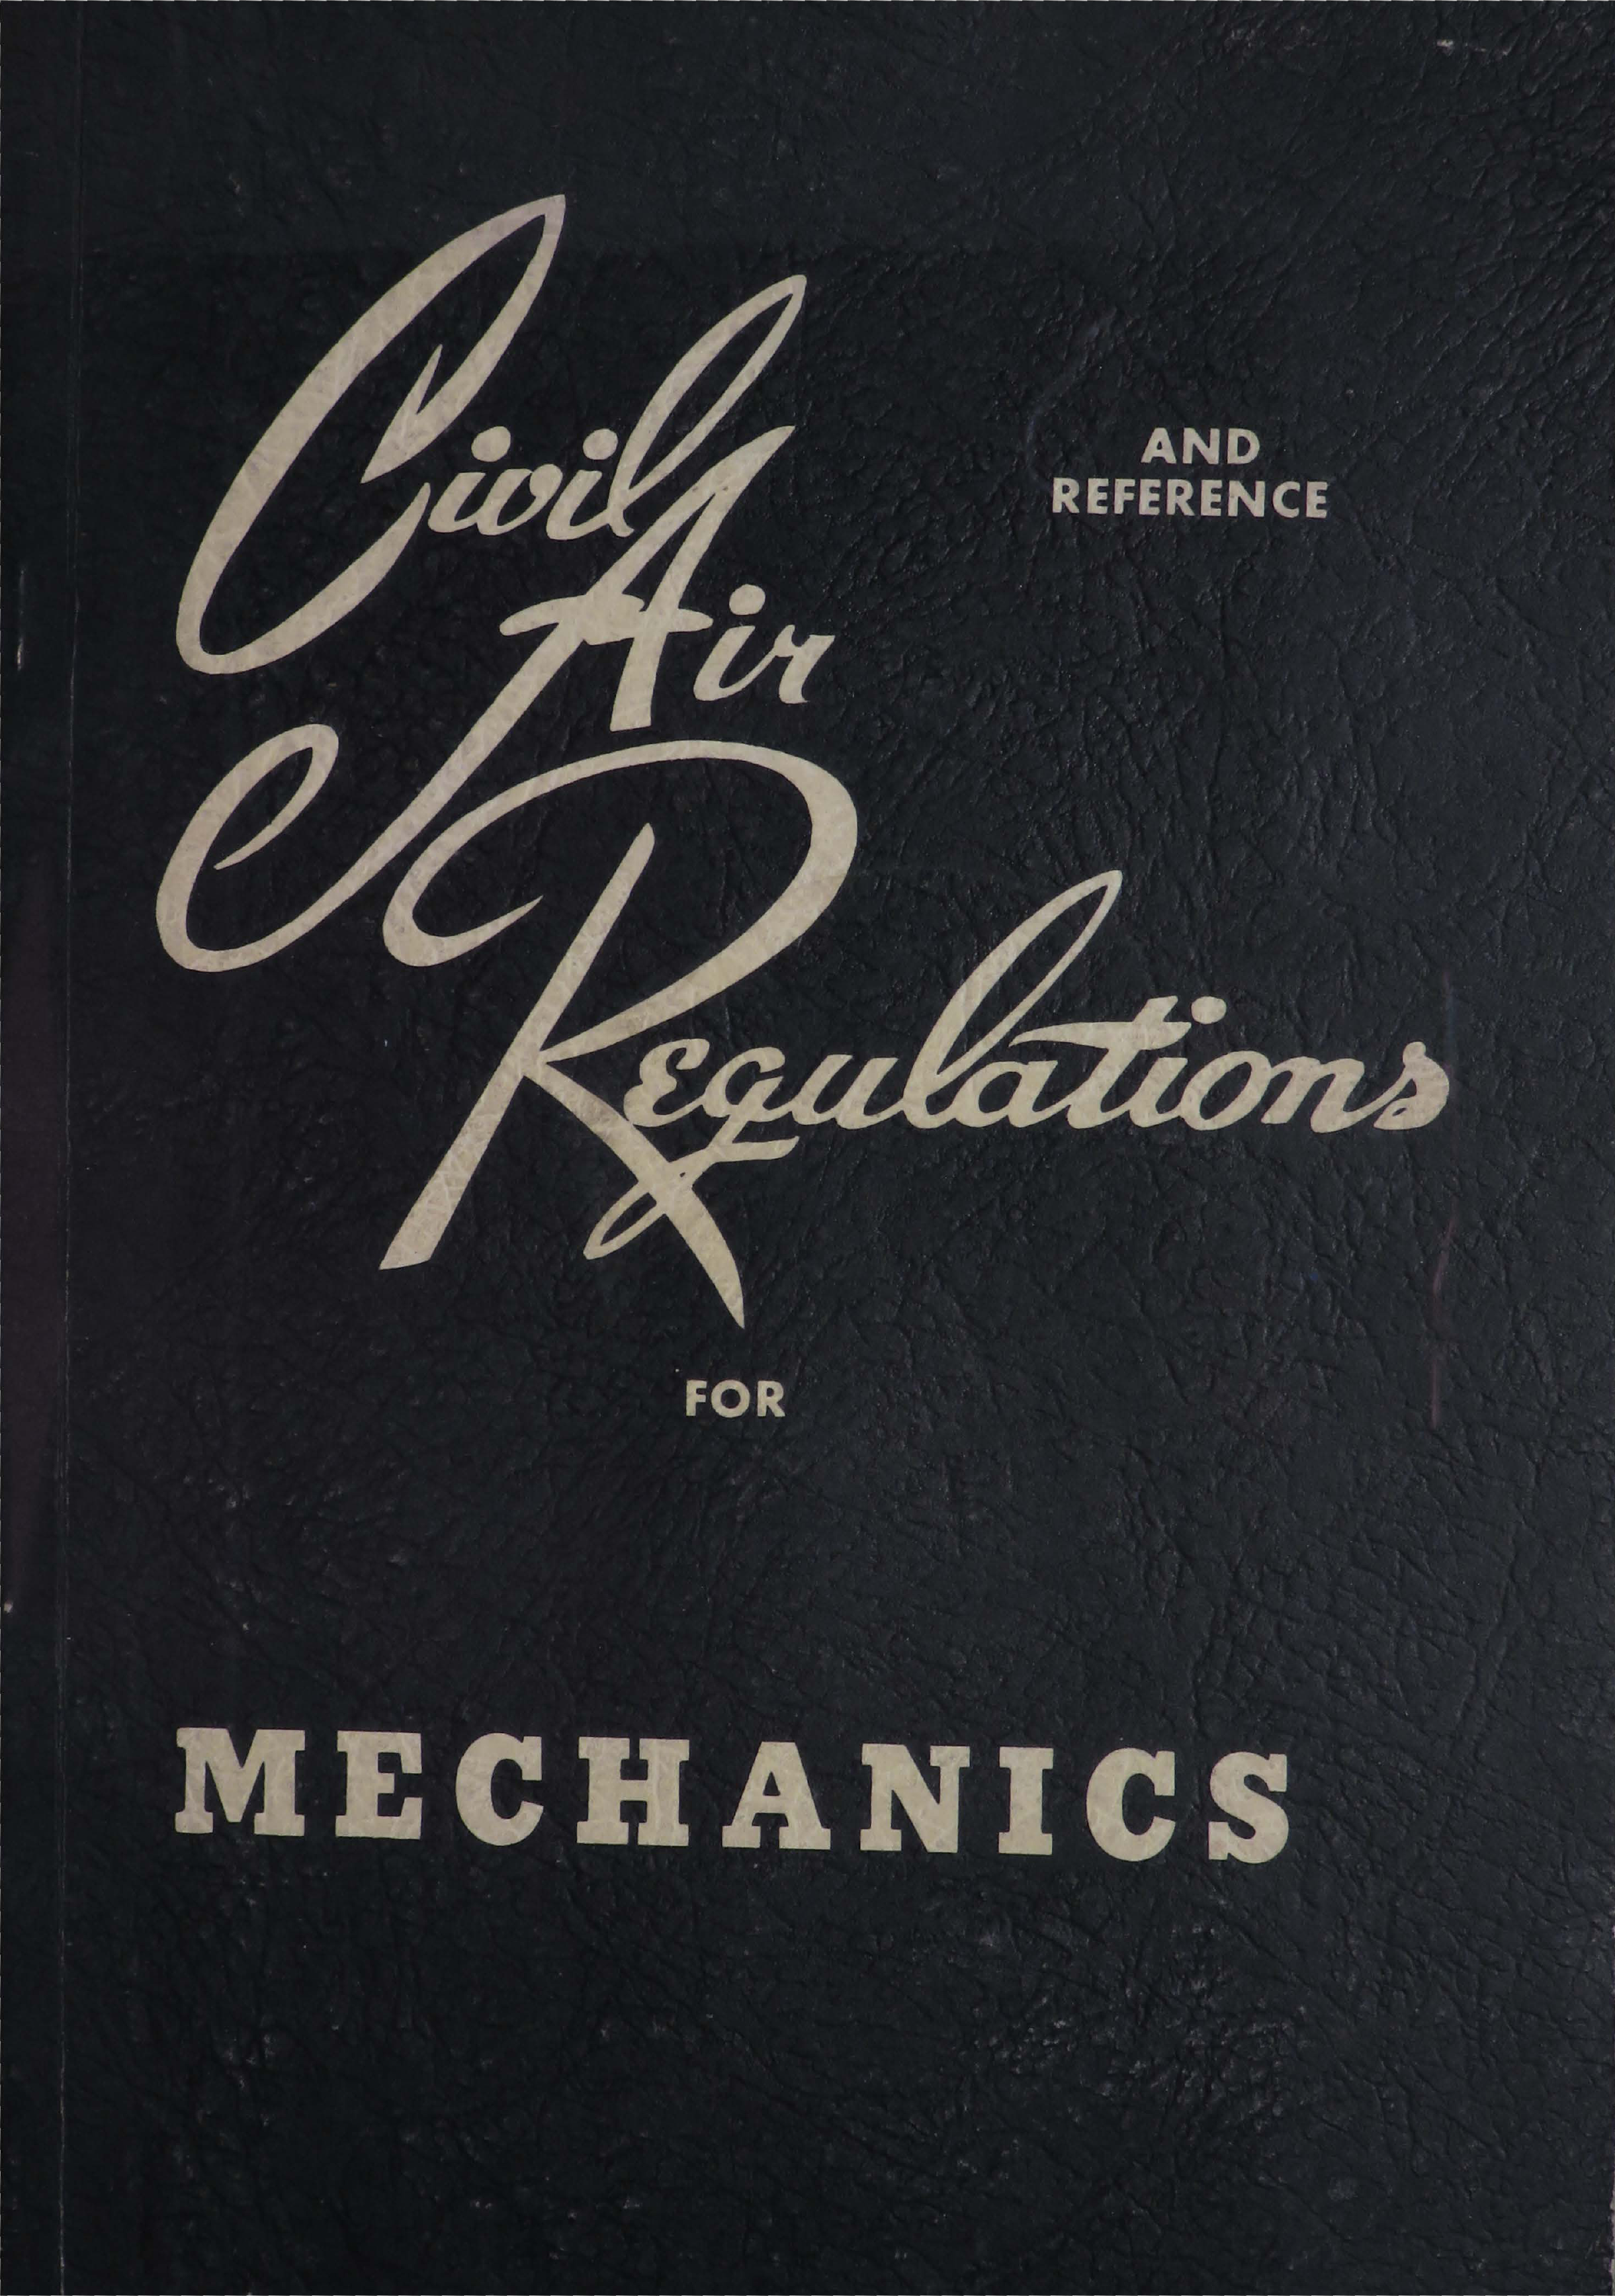 Sample page 1 from AirCorps Library document: Civil Air Regulations for Mechanics